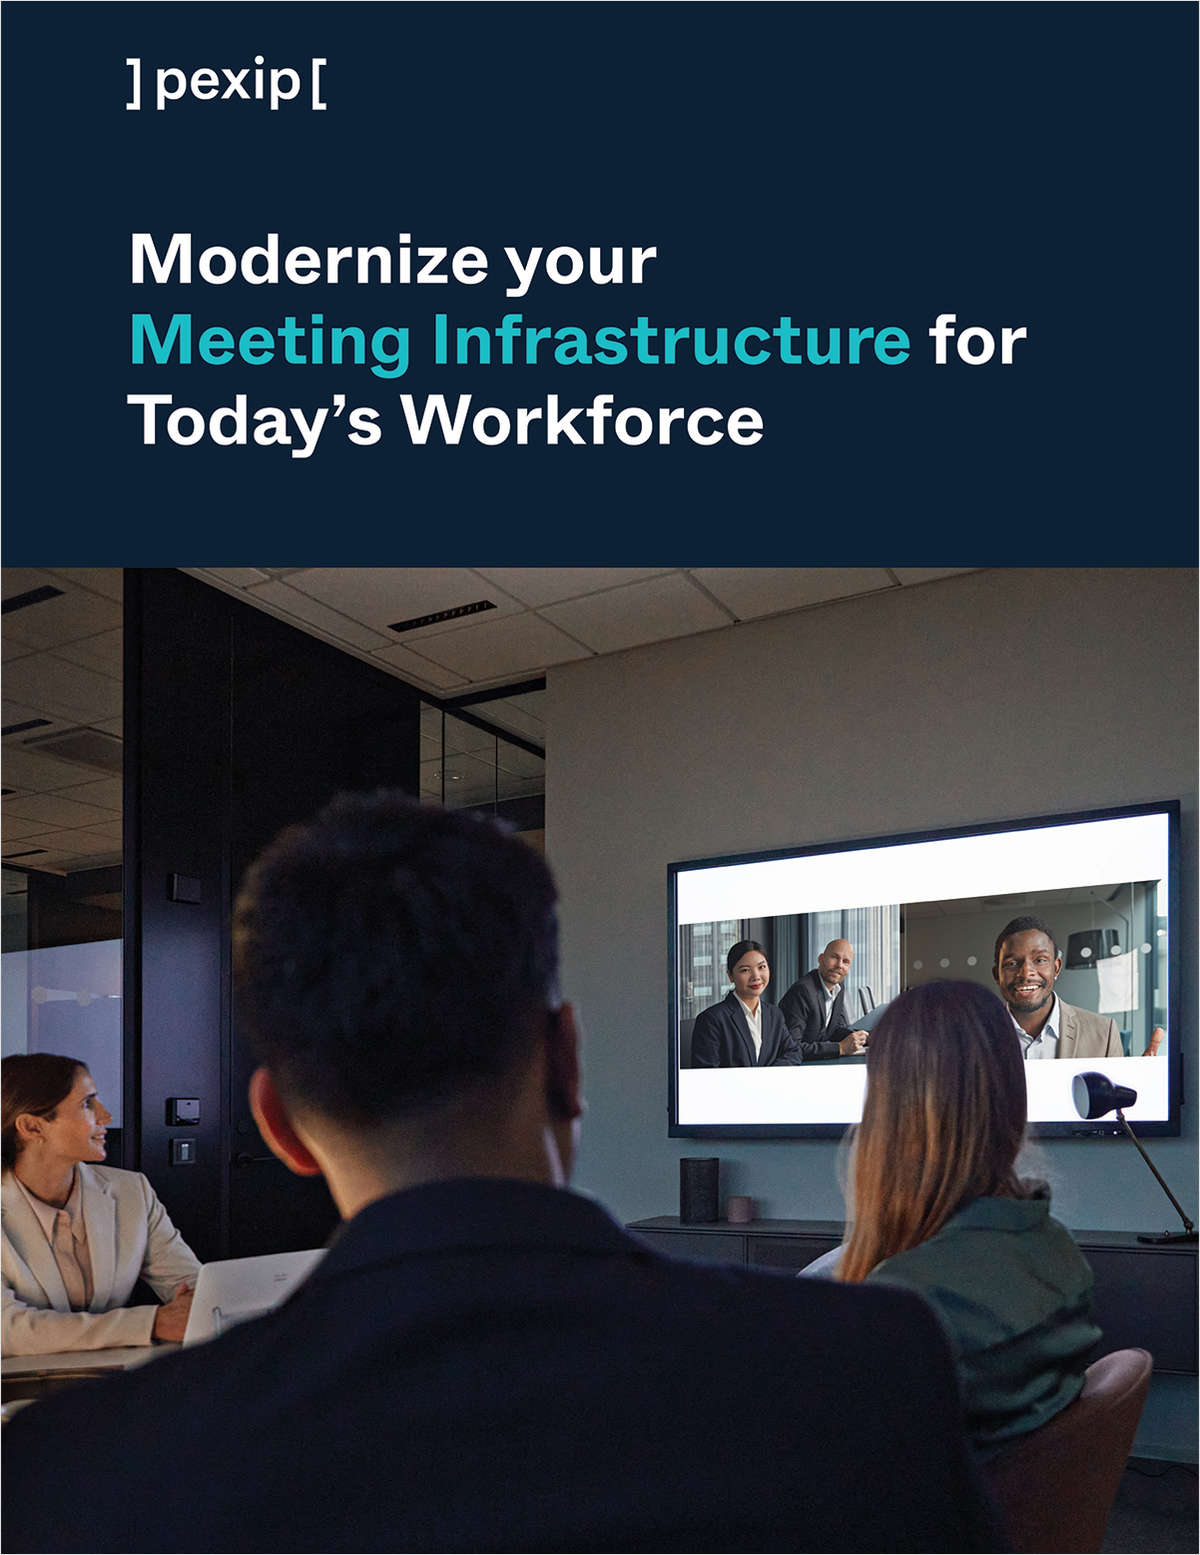 Modernize your Meeting Infrastructure for Today's Workforce